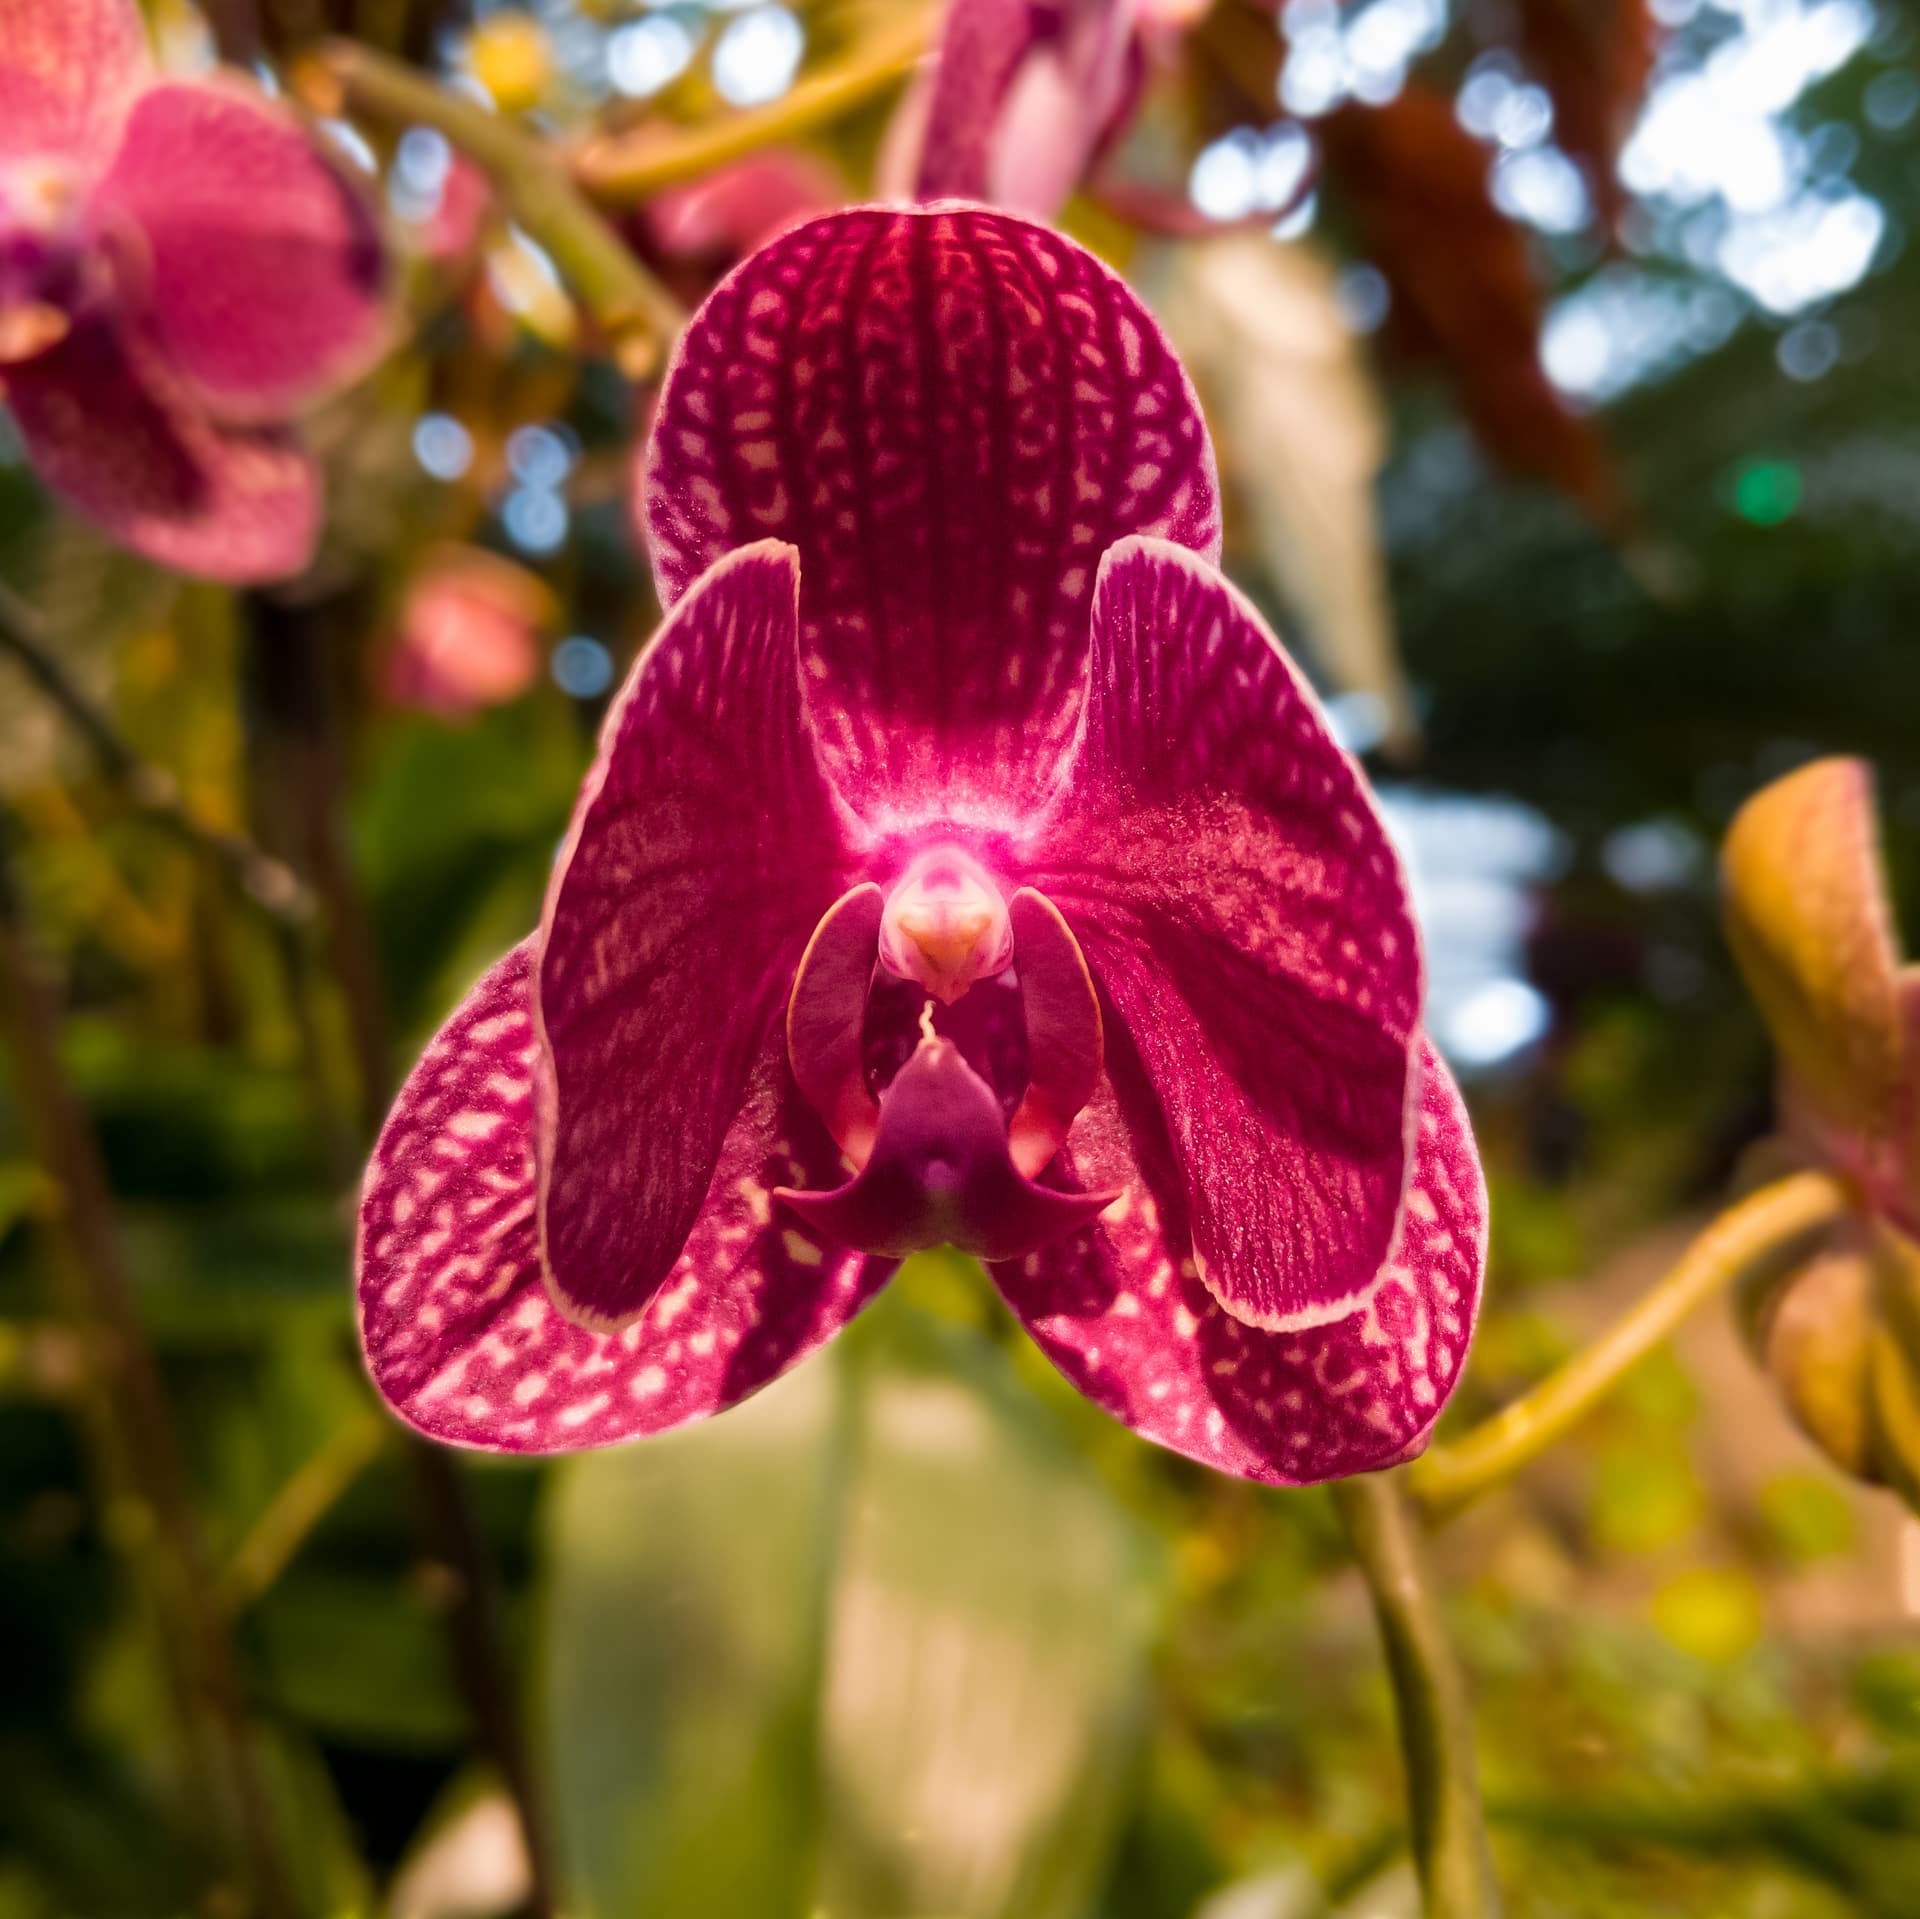 A head-on shot of a deep, wine-red colored orchid flower.